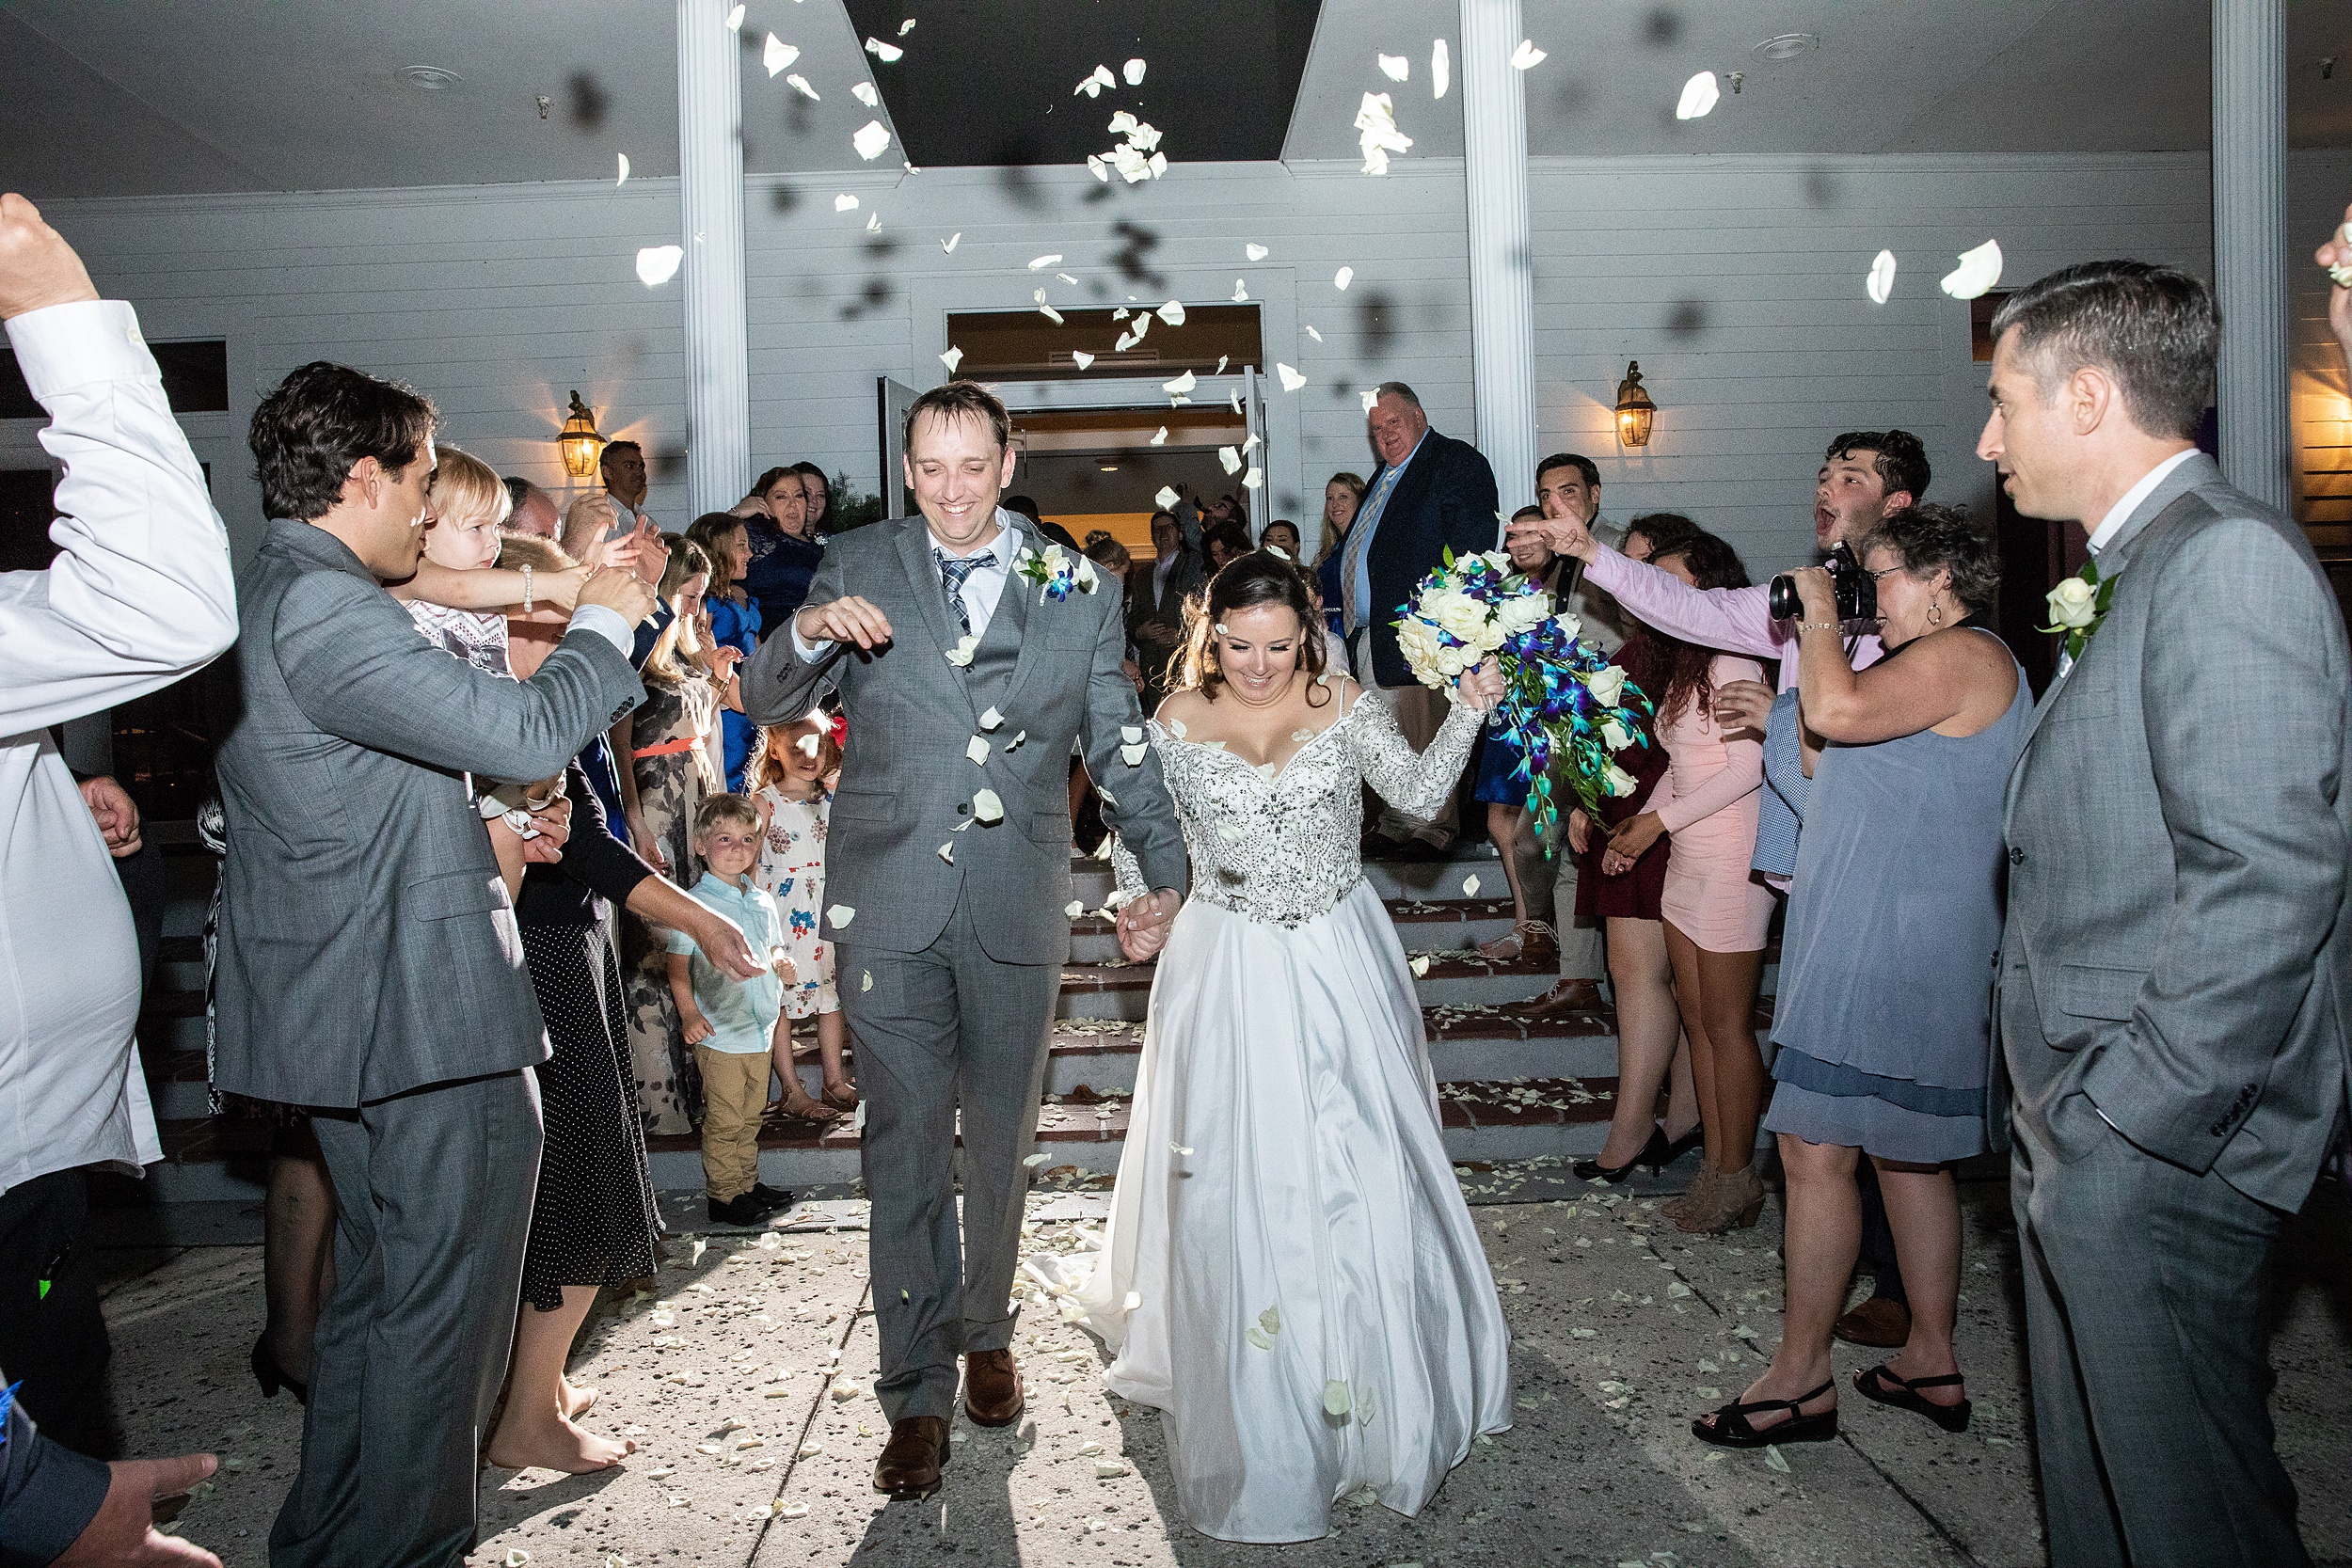 Newlyweds exit their deercreek country club wedding reception surrounded by guests throwing white rose petals